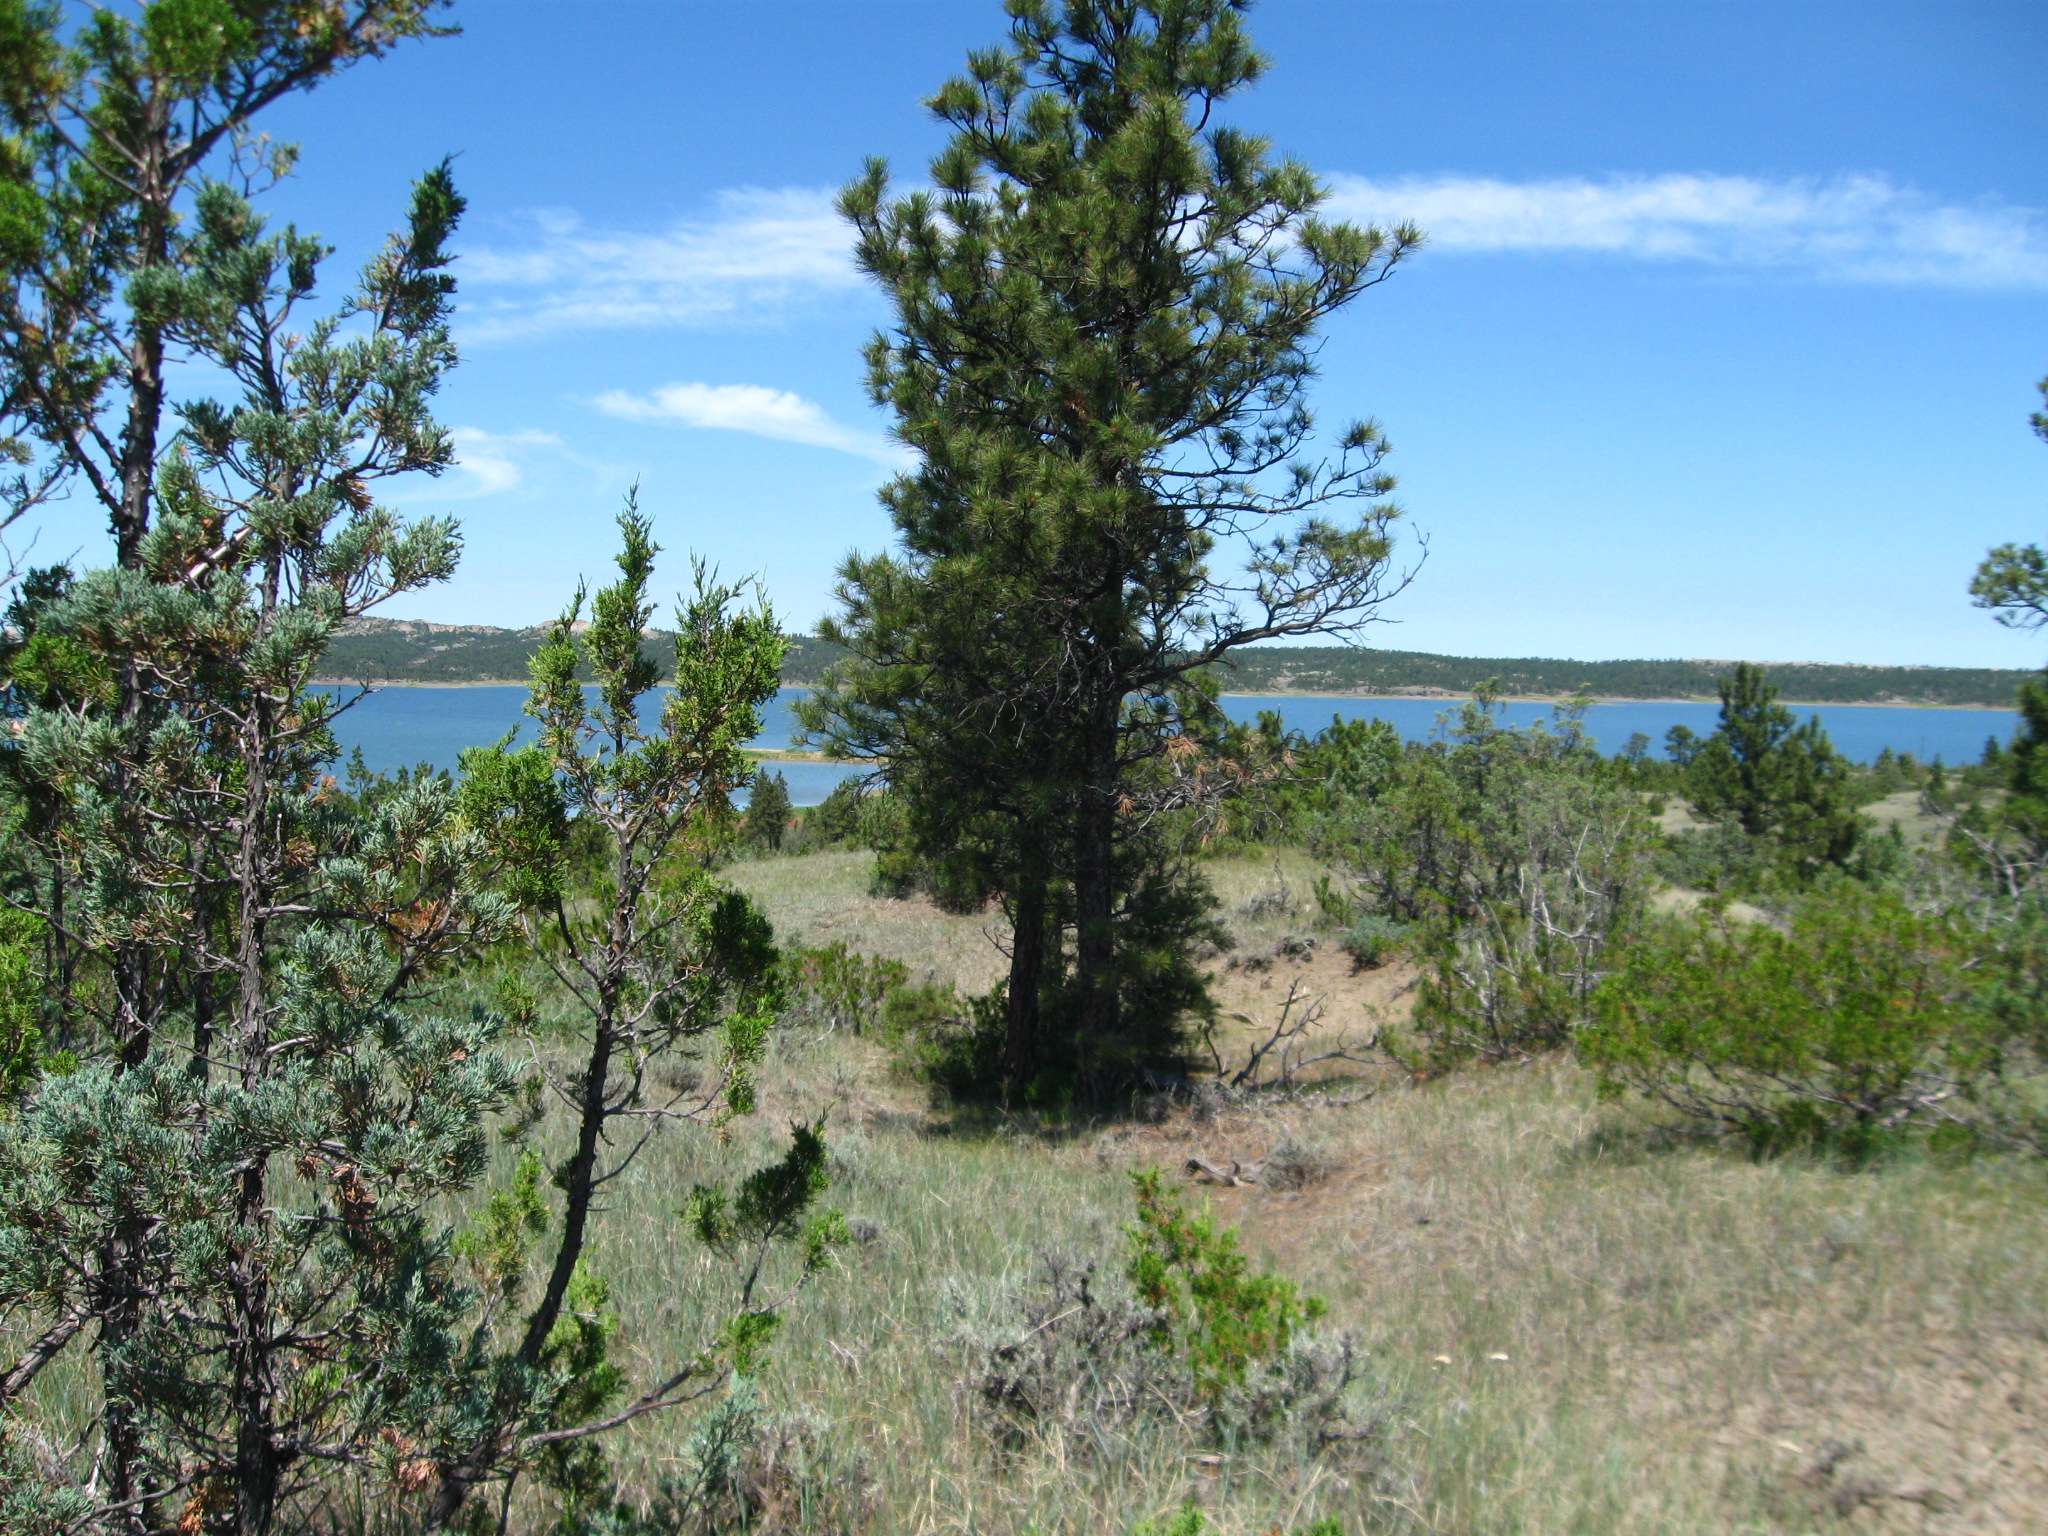 Fort Peck Lake - reaching into portions of six counties